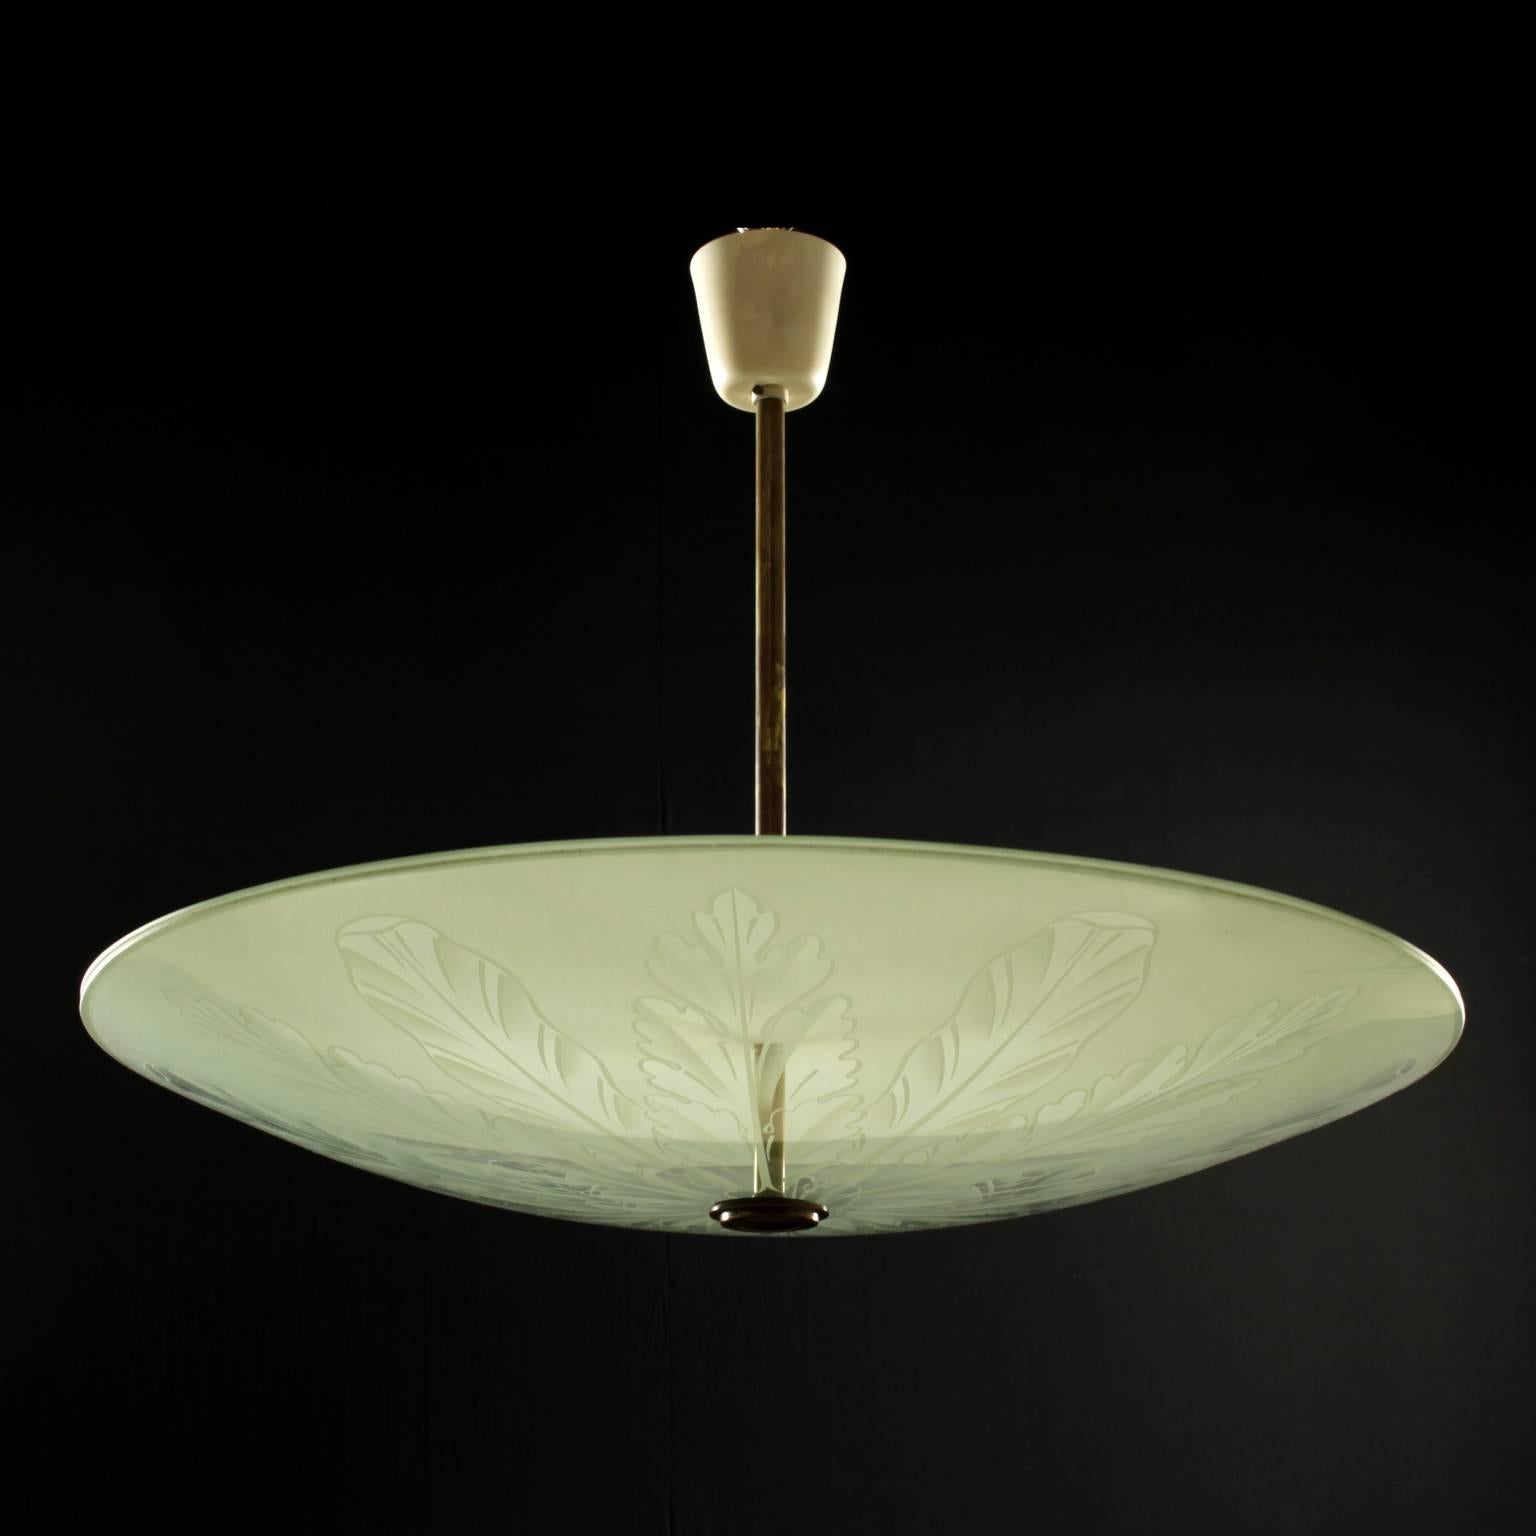 Ceiling lamp, brass, satin glass, engraving decoration. Manufactured in Italy, 1930s-1940s.